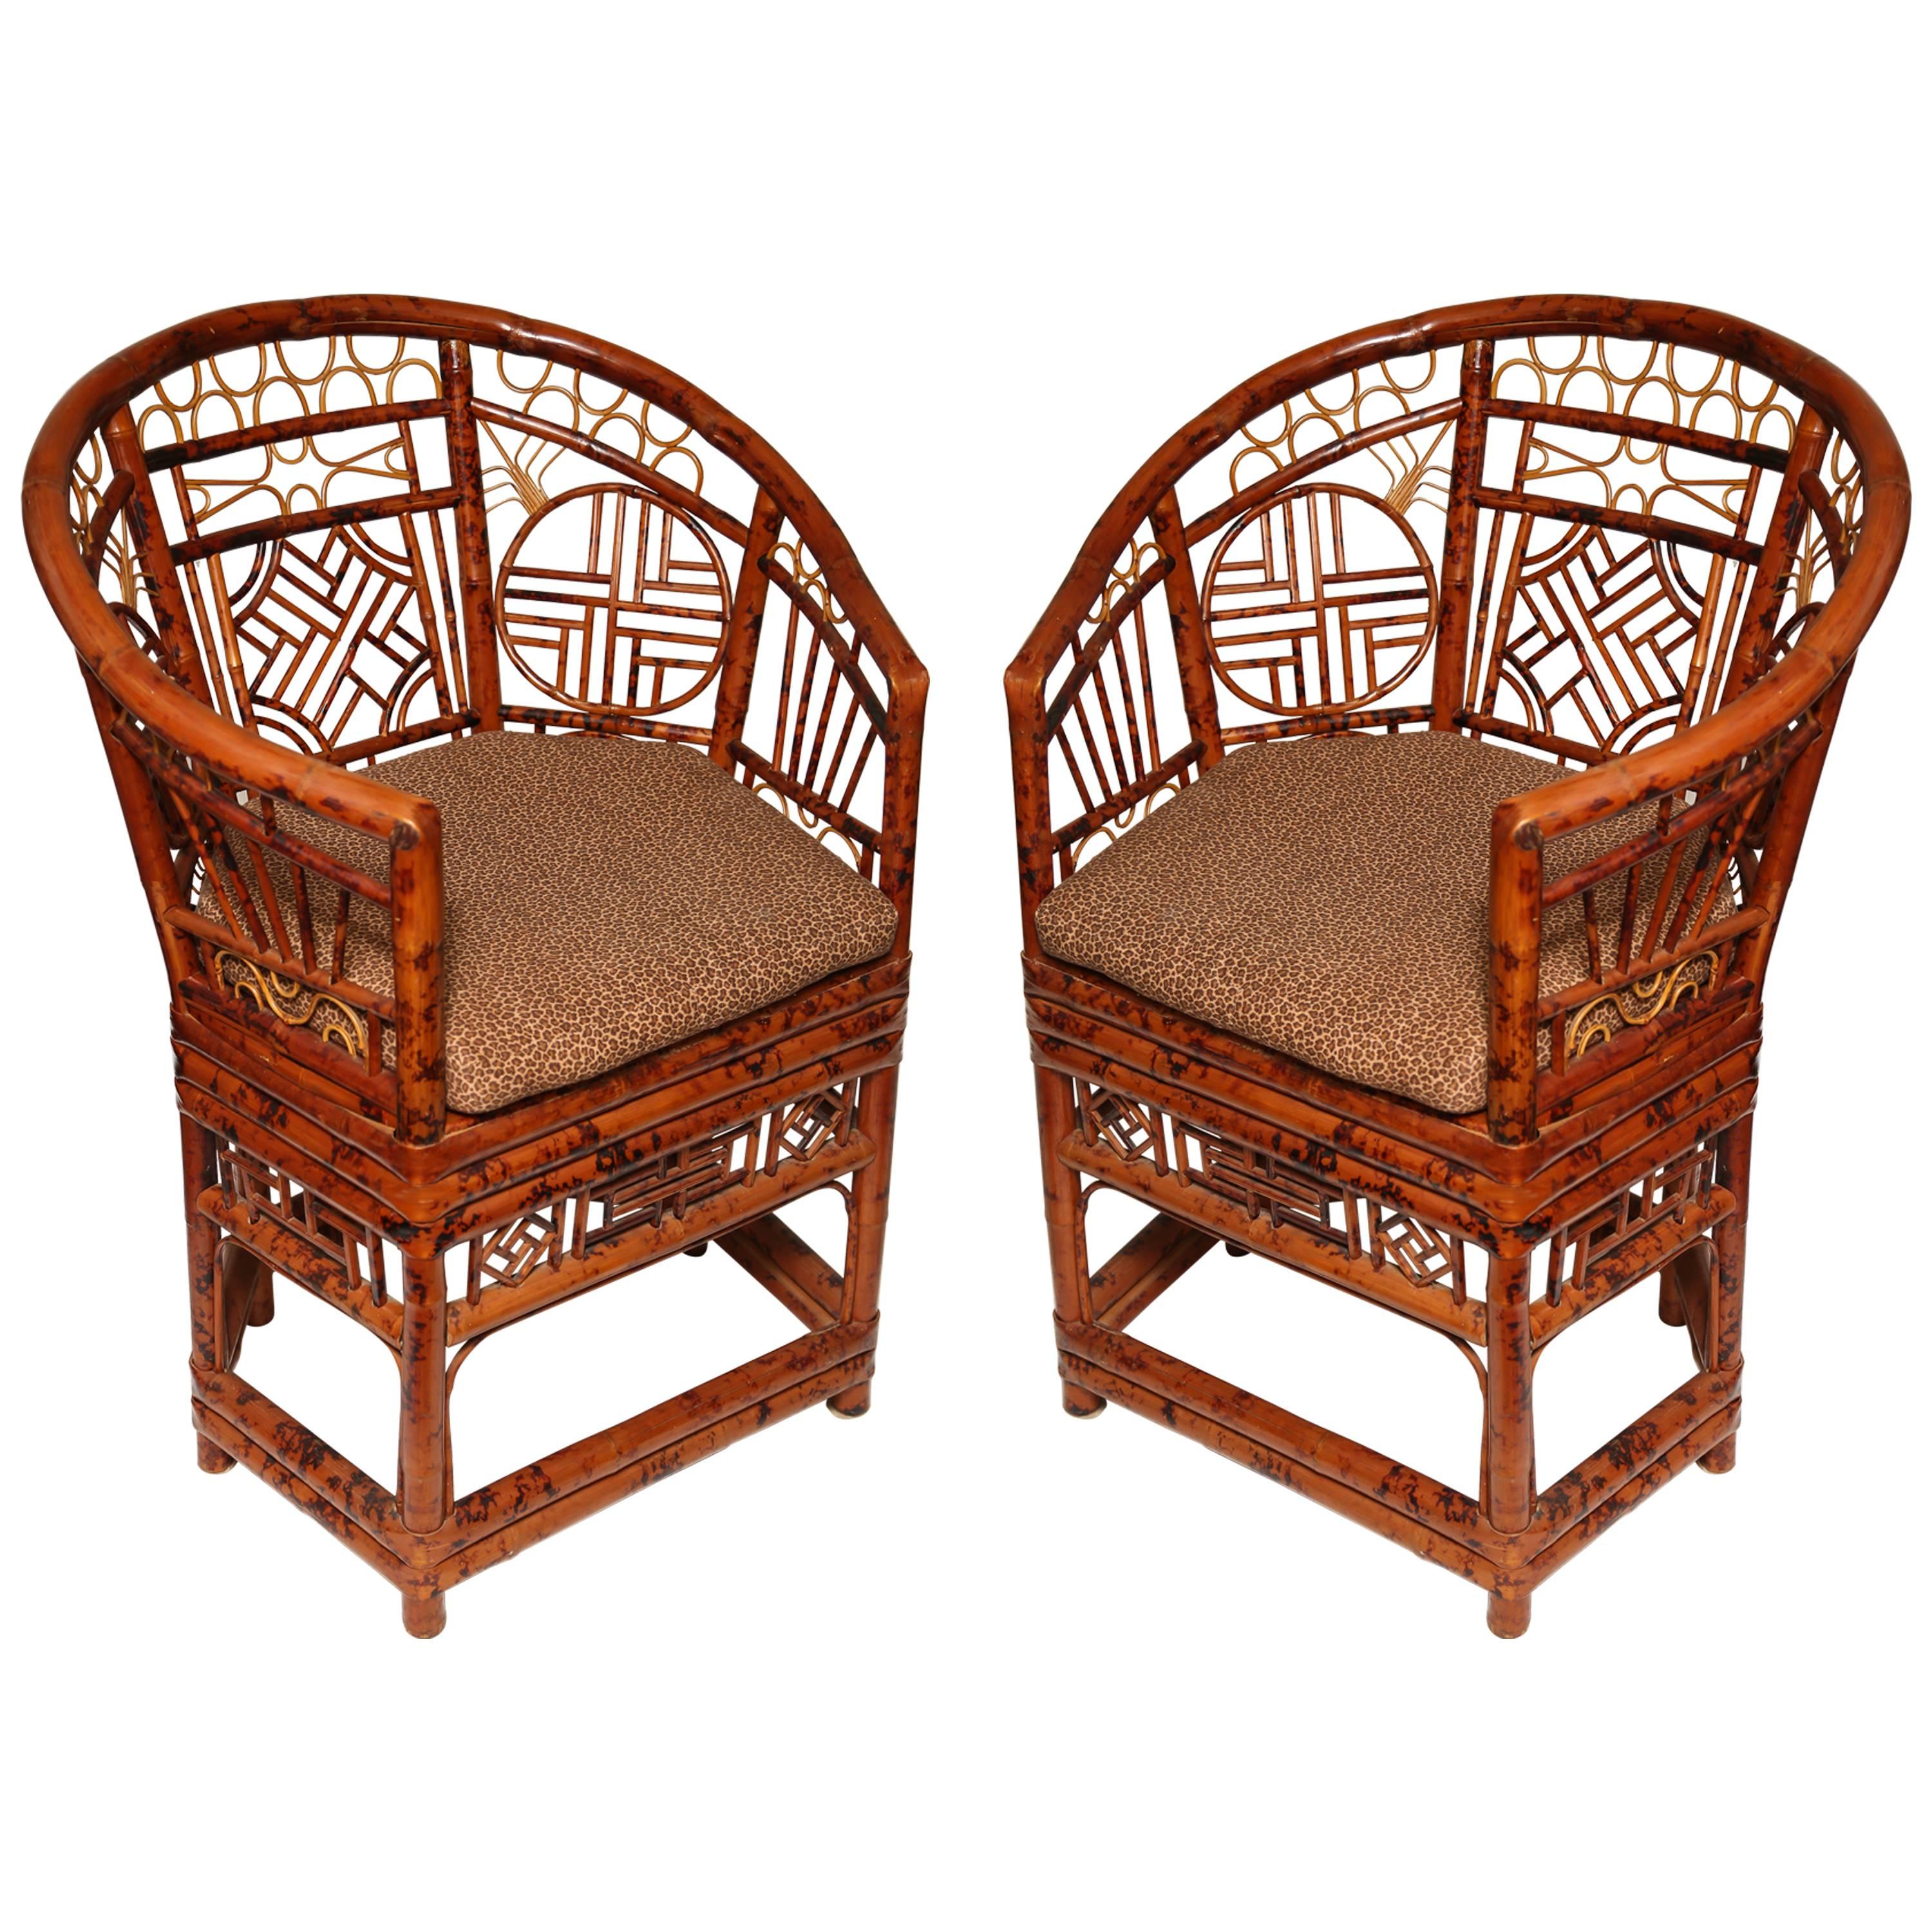 Pair of Unusual Chinese  Brighton  Bamboo Barrel Back Chairs